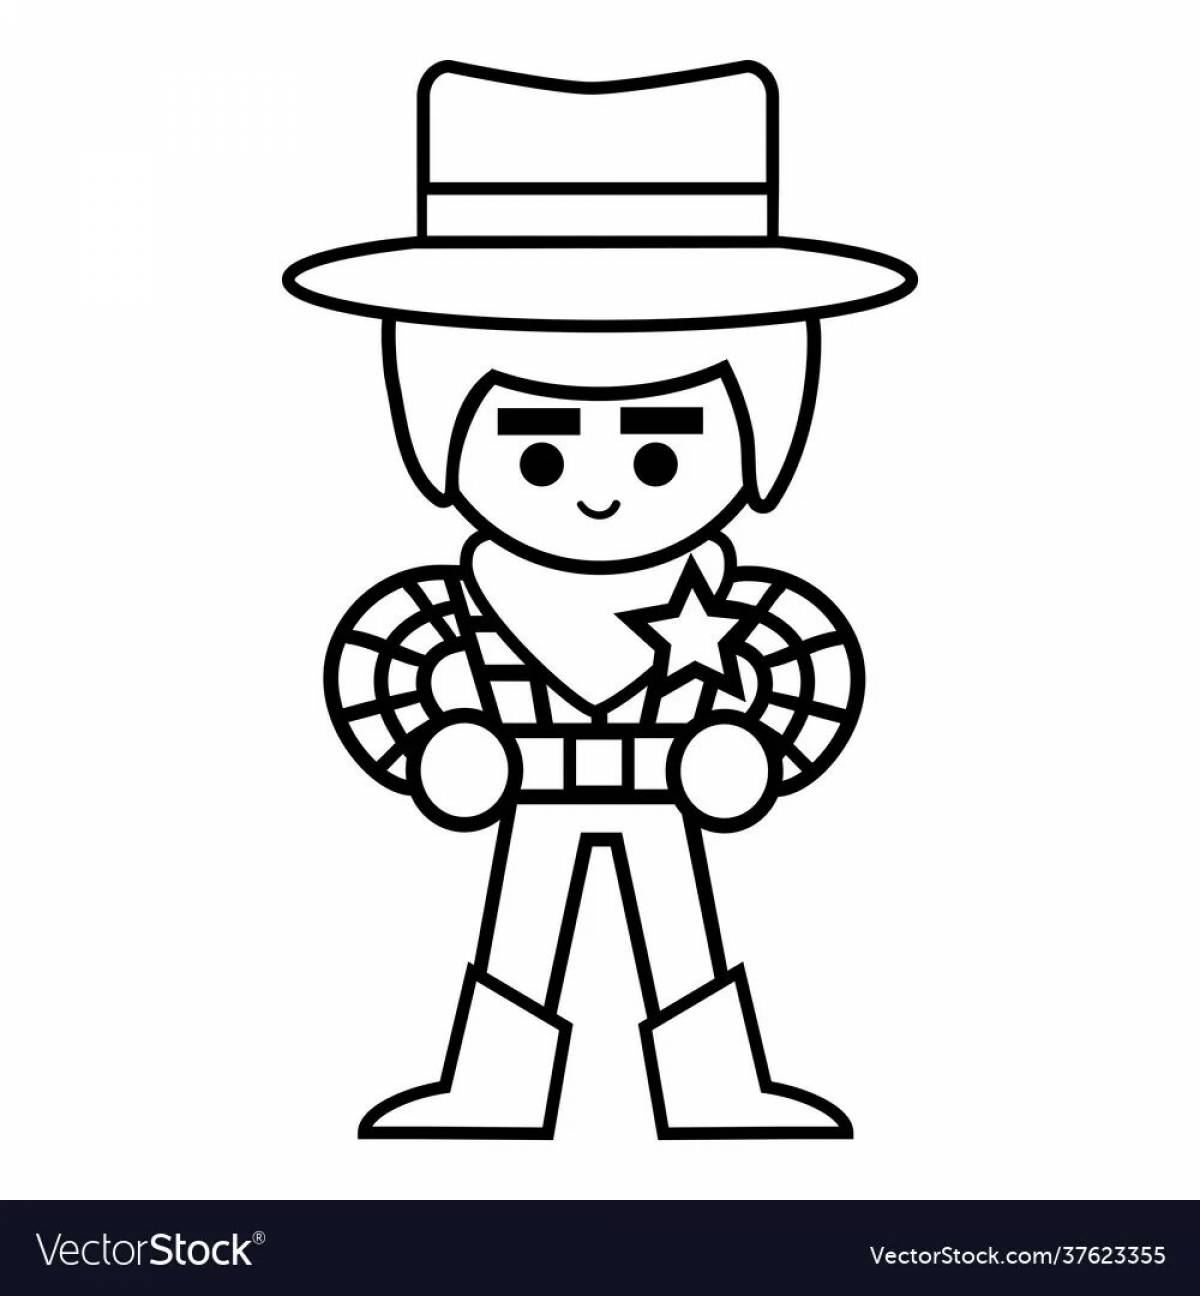 Coloring page cheerful sheriff